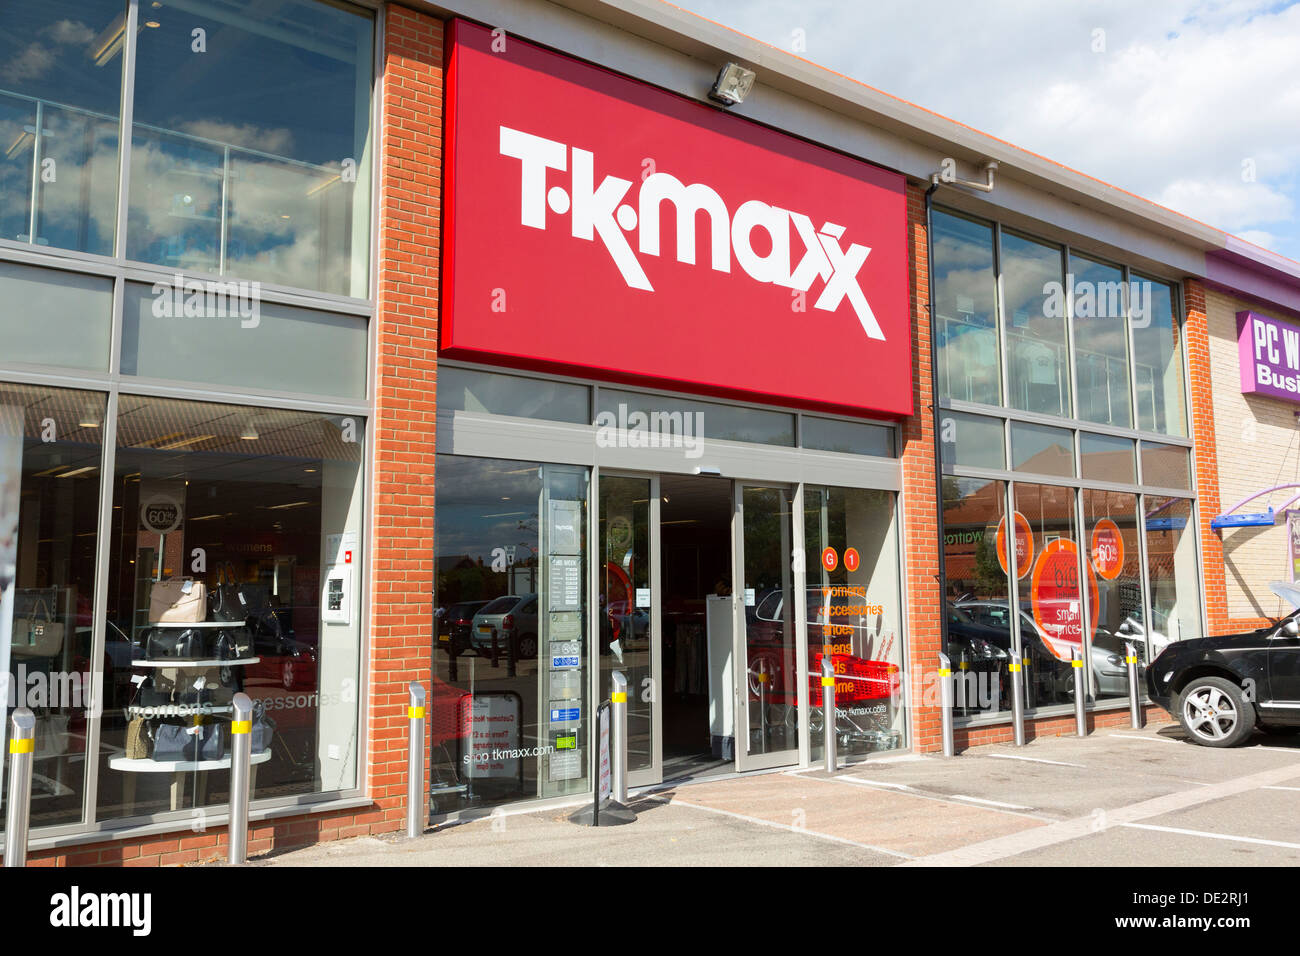 Tk maxx uk hi-res stock photography and images - Alamy